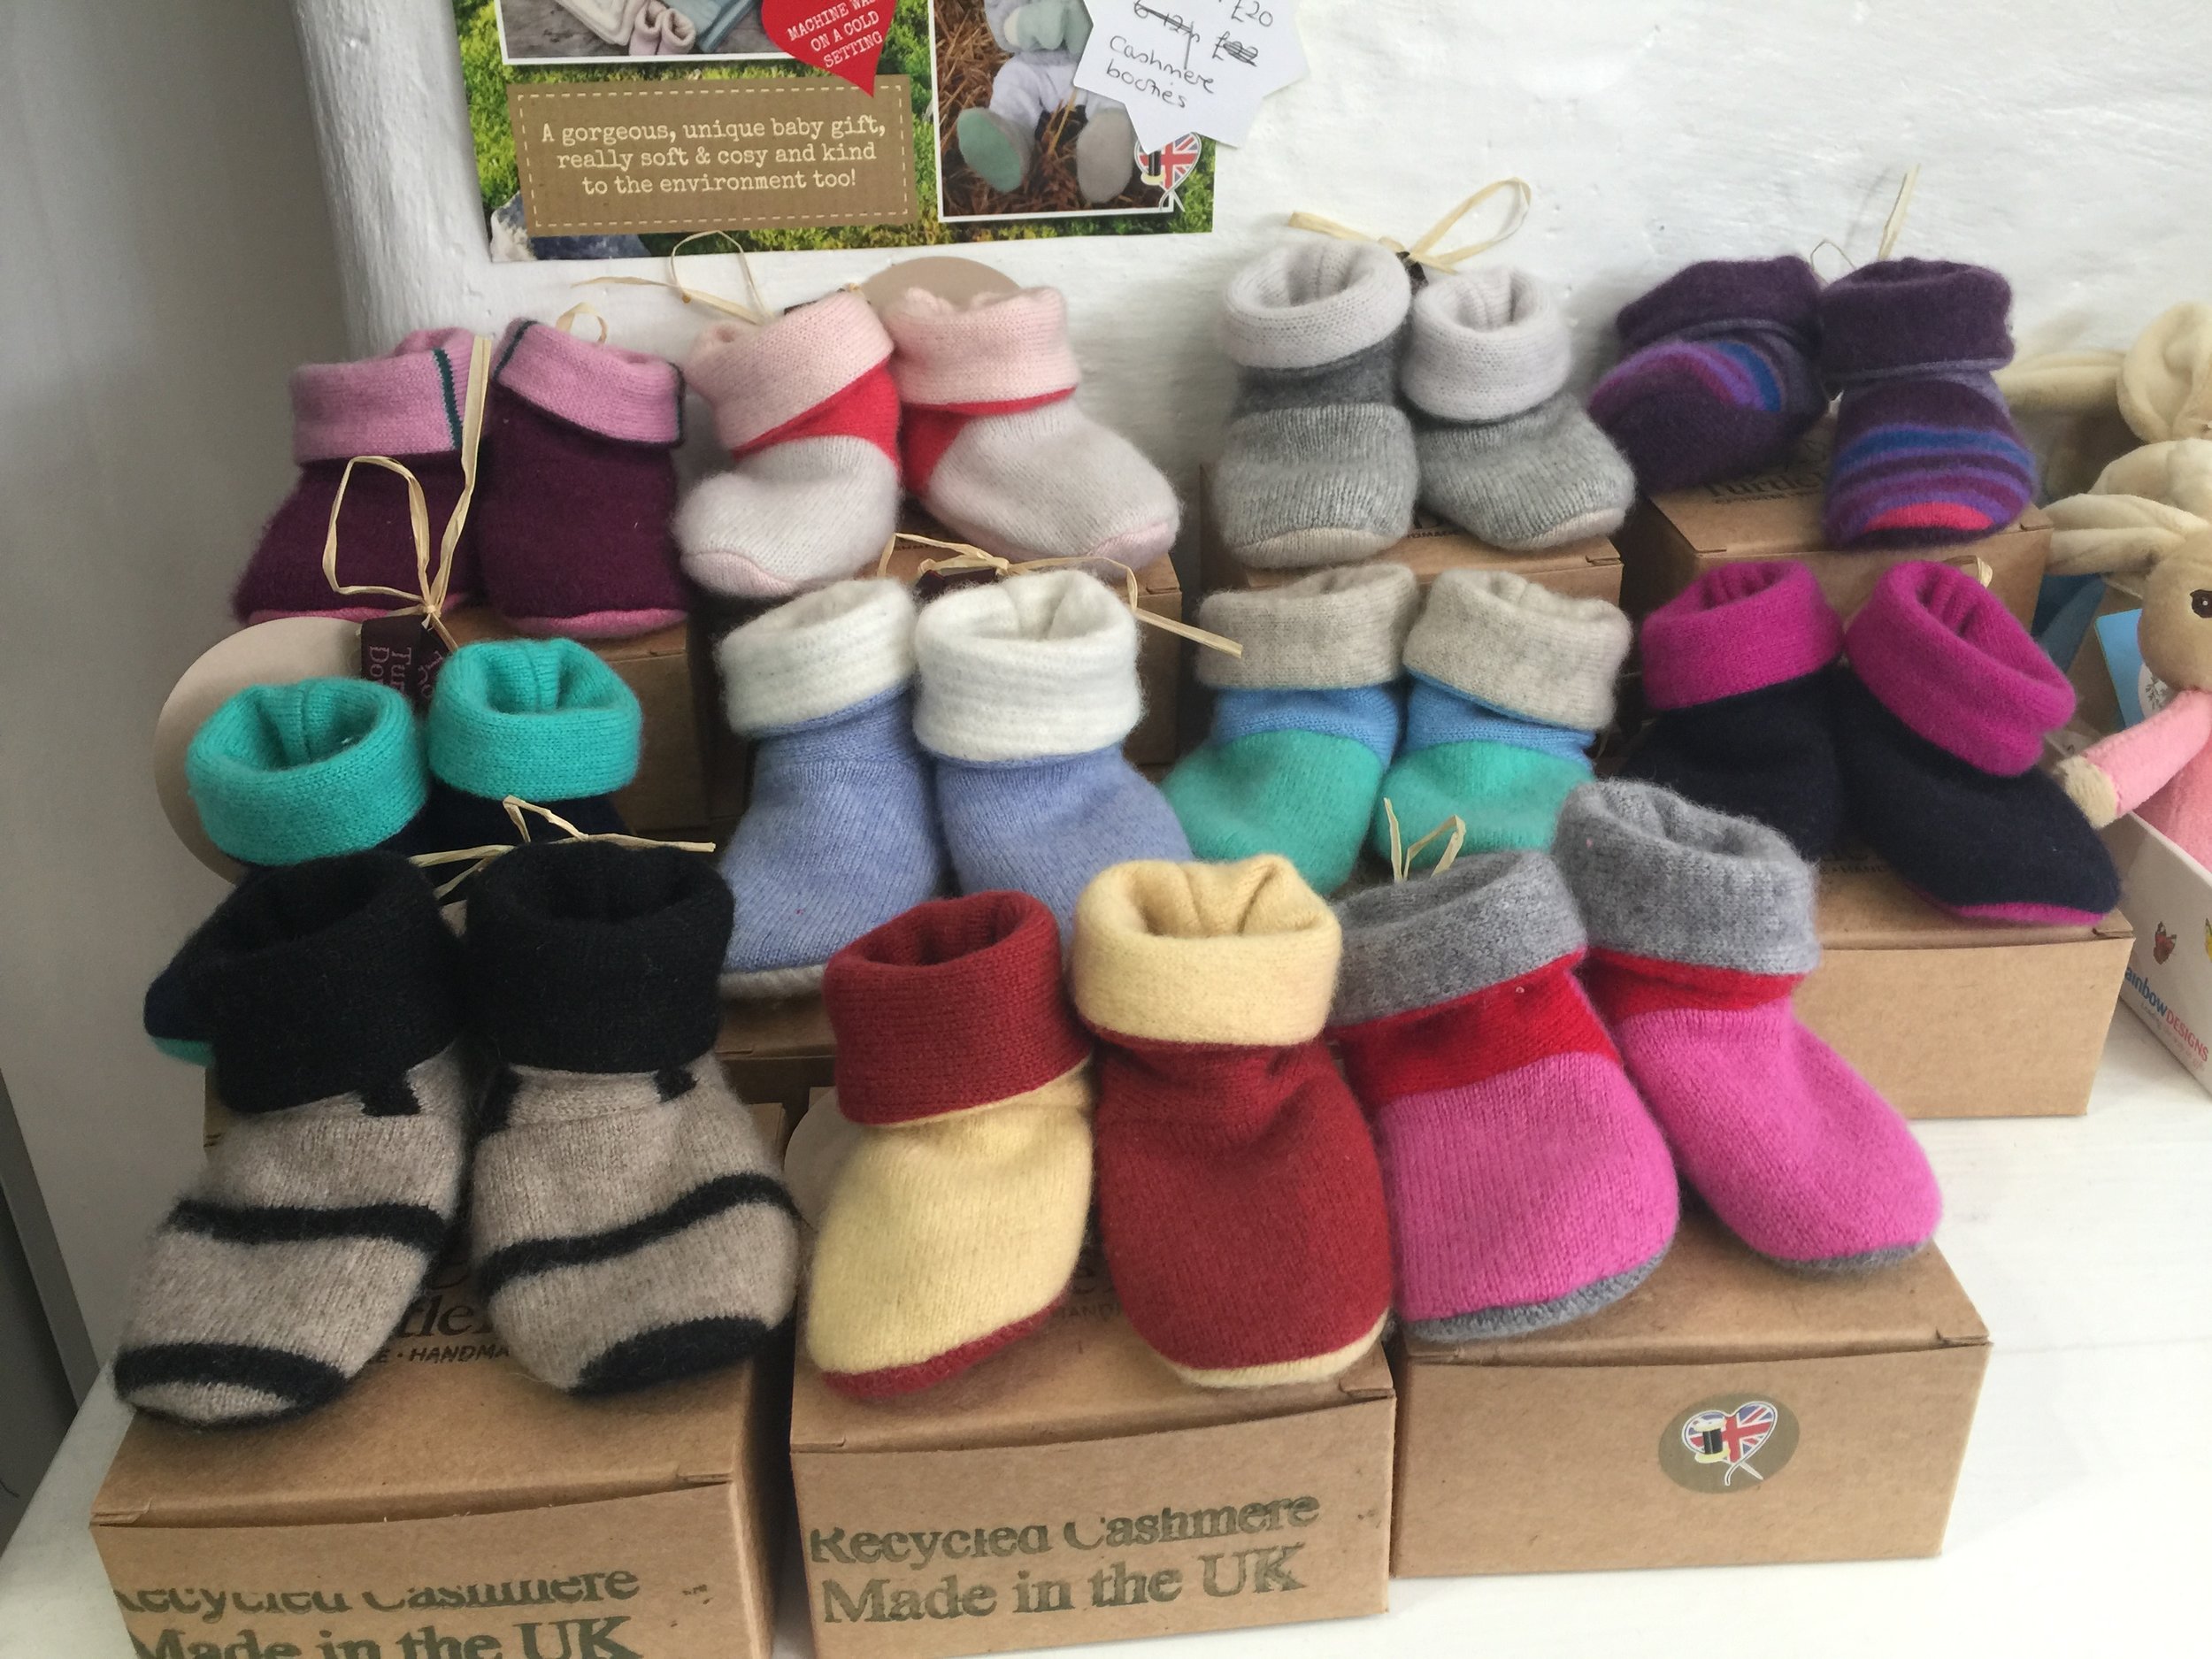 Smarti - Gifts for the newborn baby: try Turtle Doves gorgeous booties made from recycled cashmeresale £20